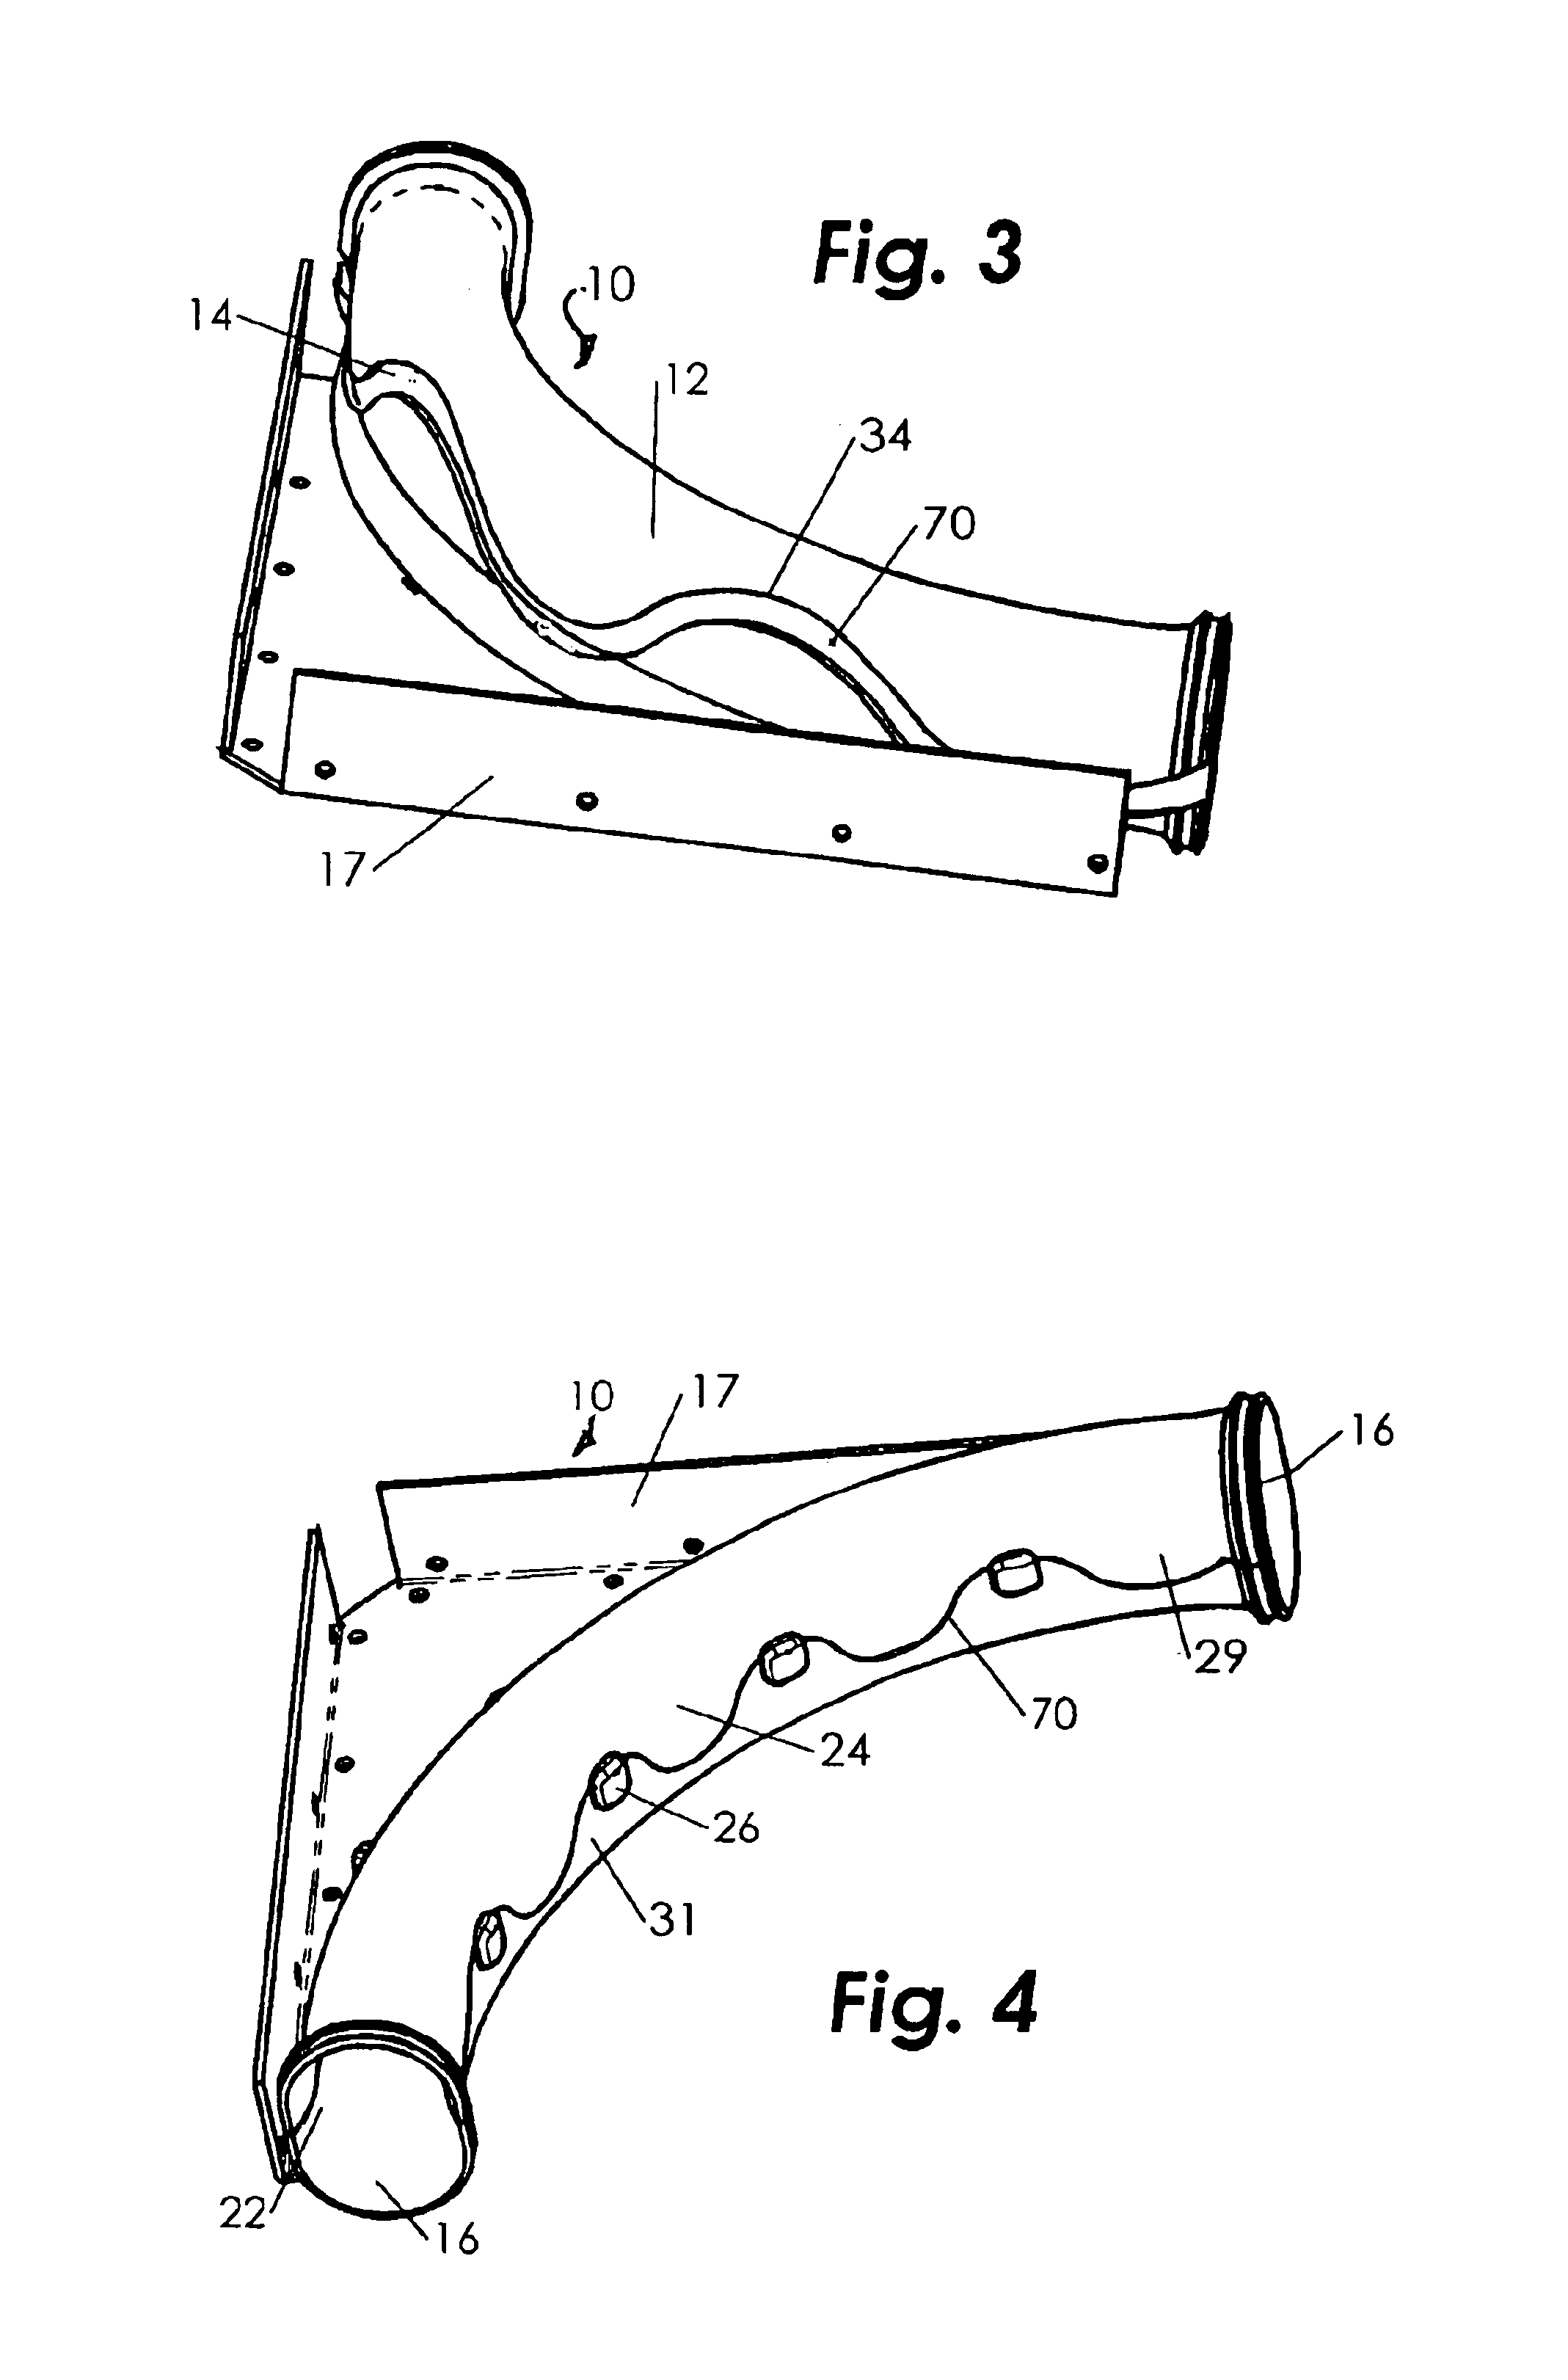 Cable routing and affixment apparatus